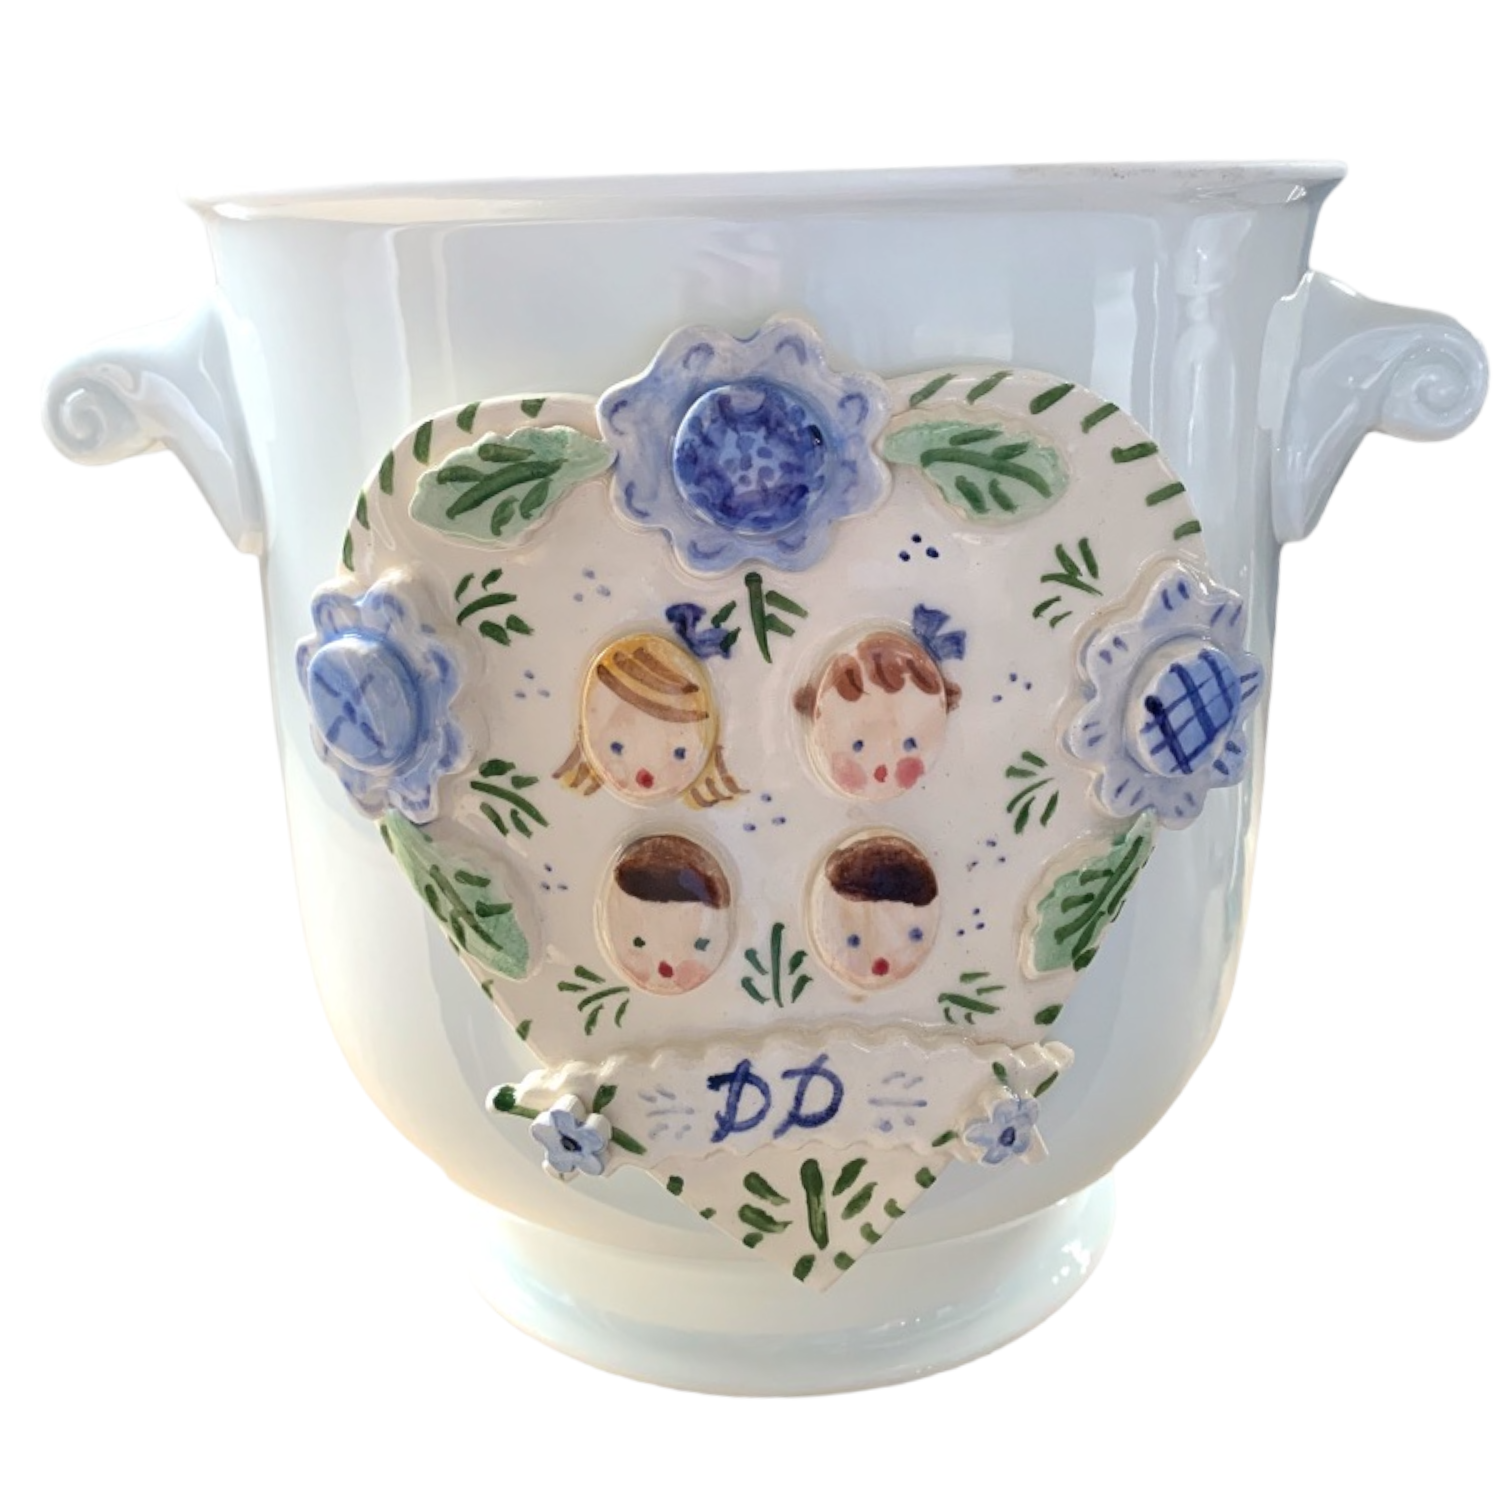 Cache Pot with Children's Faces - Blue Flowers and Heart